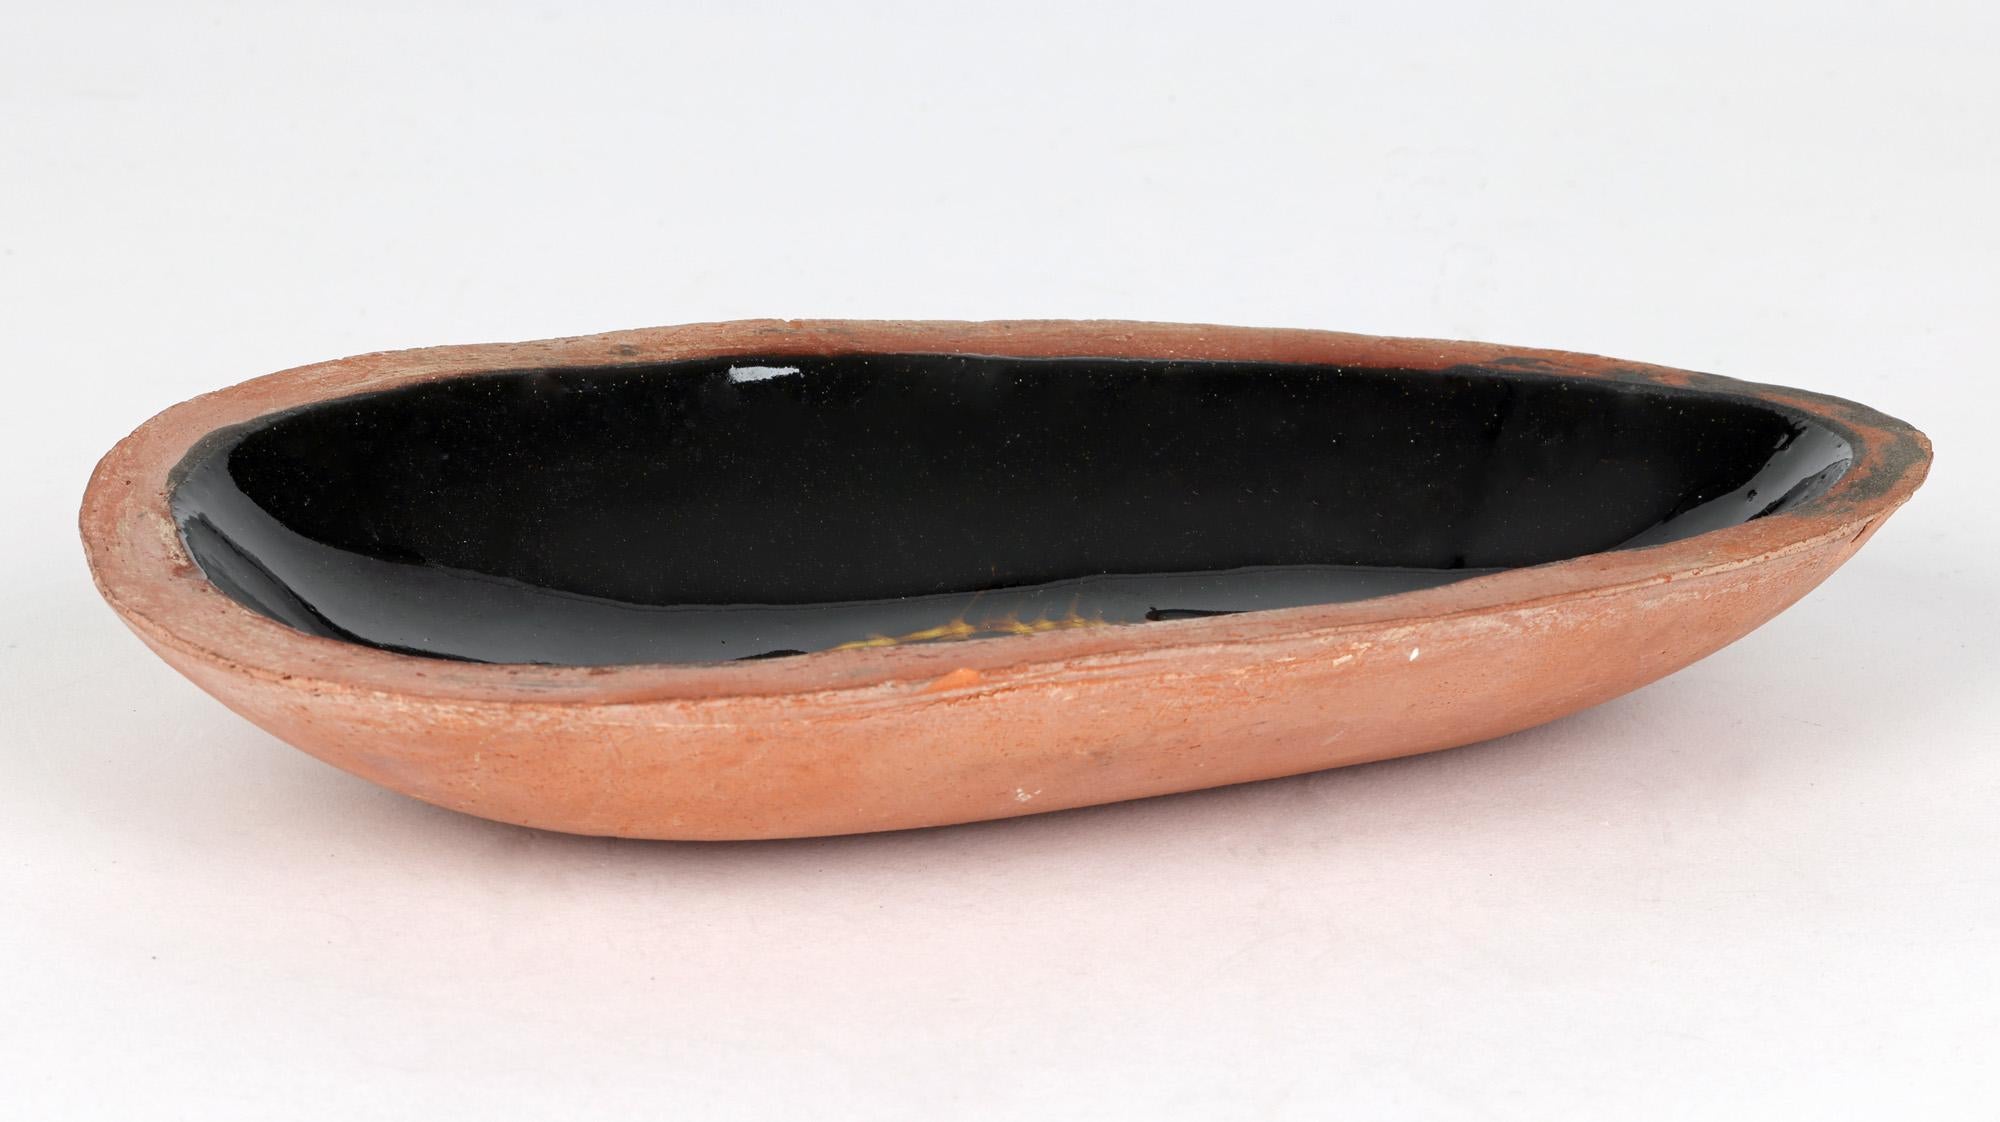 A stylish British studio pottery dish decorated with a slipware fish design in the manner of Winchcombe and signed Gilbert dating from the 20th century. The oval shaped dish narrows to one end and is heavily hand made from thick terracotta clay with